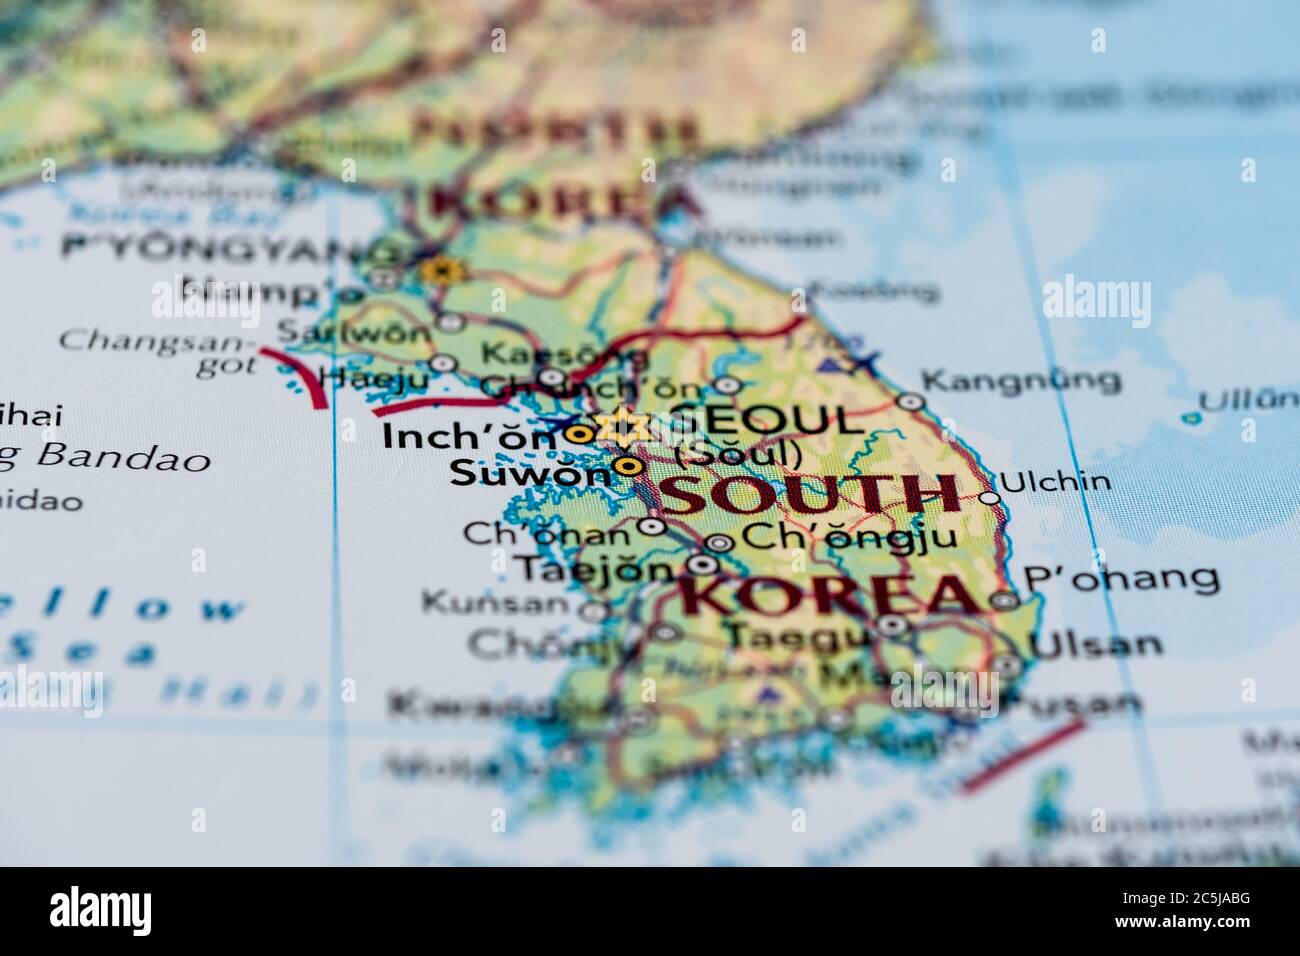 Shallow focus of a general map showing Seoul, the capital of South Korea. The Korean peninsula can be seen with some surrounding Korean regions. Stock Photo